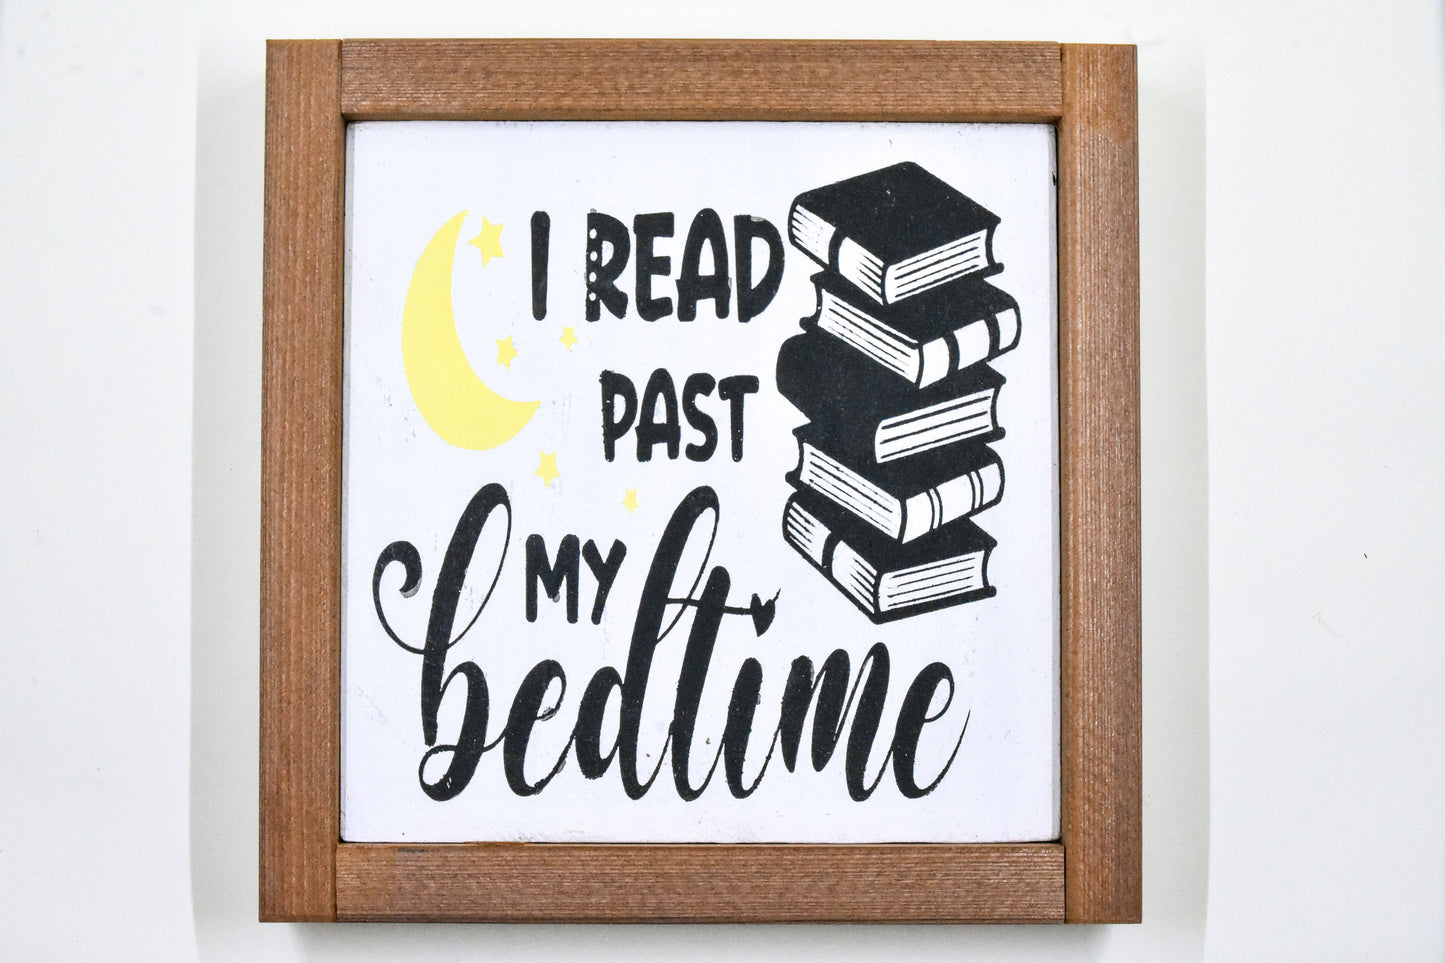 Read past Bedtime 5x5 Shelf Sitter Signs- Share Your Hobbies, Great for Gifting! Sassafras Originals